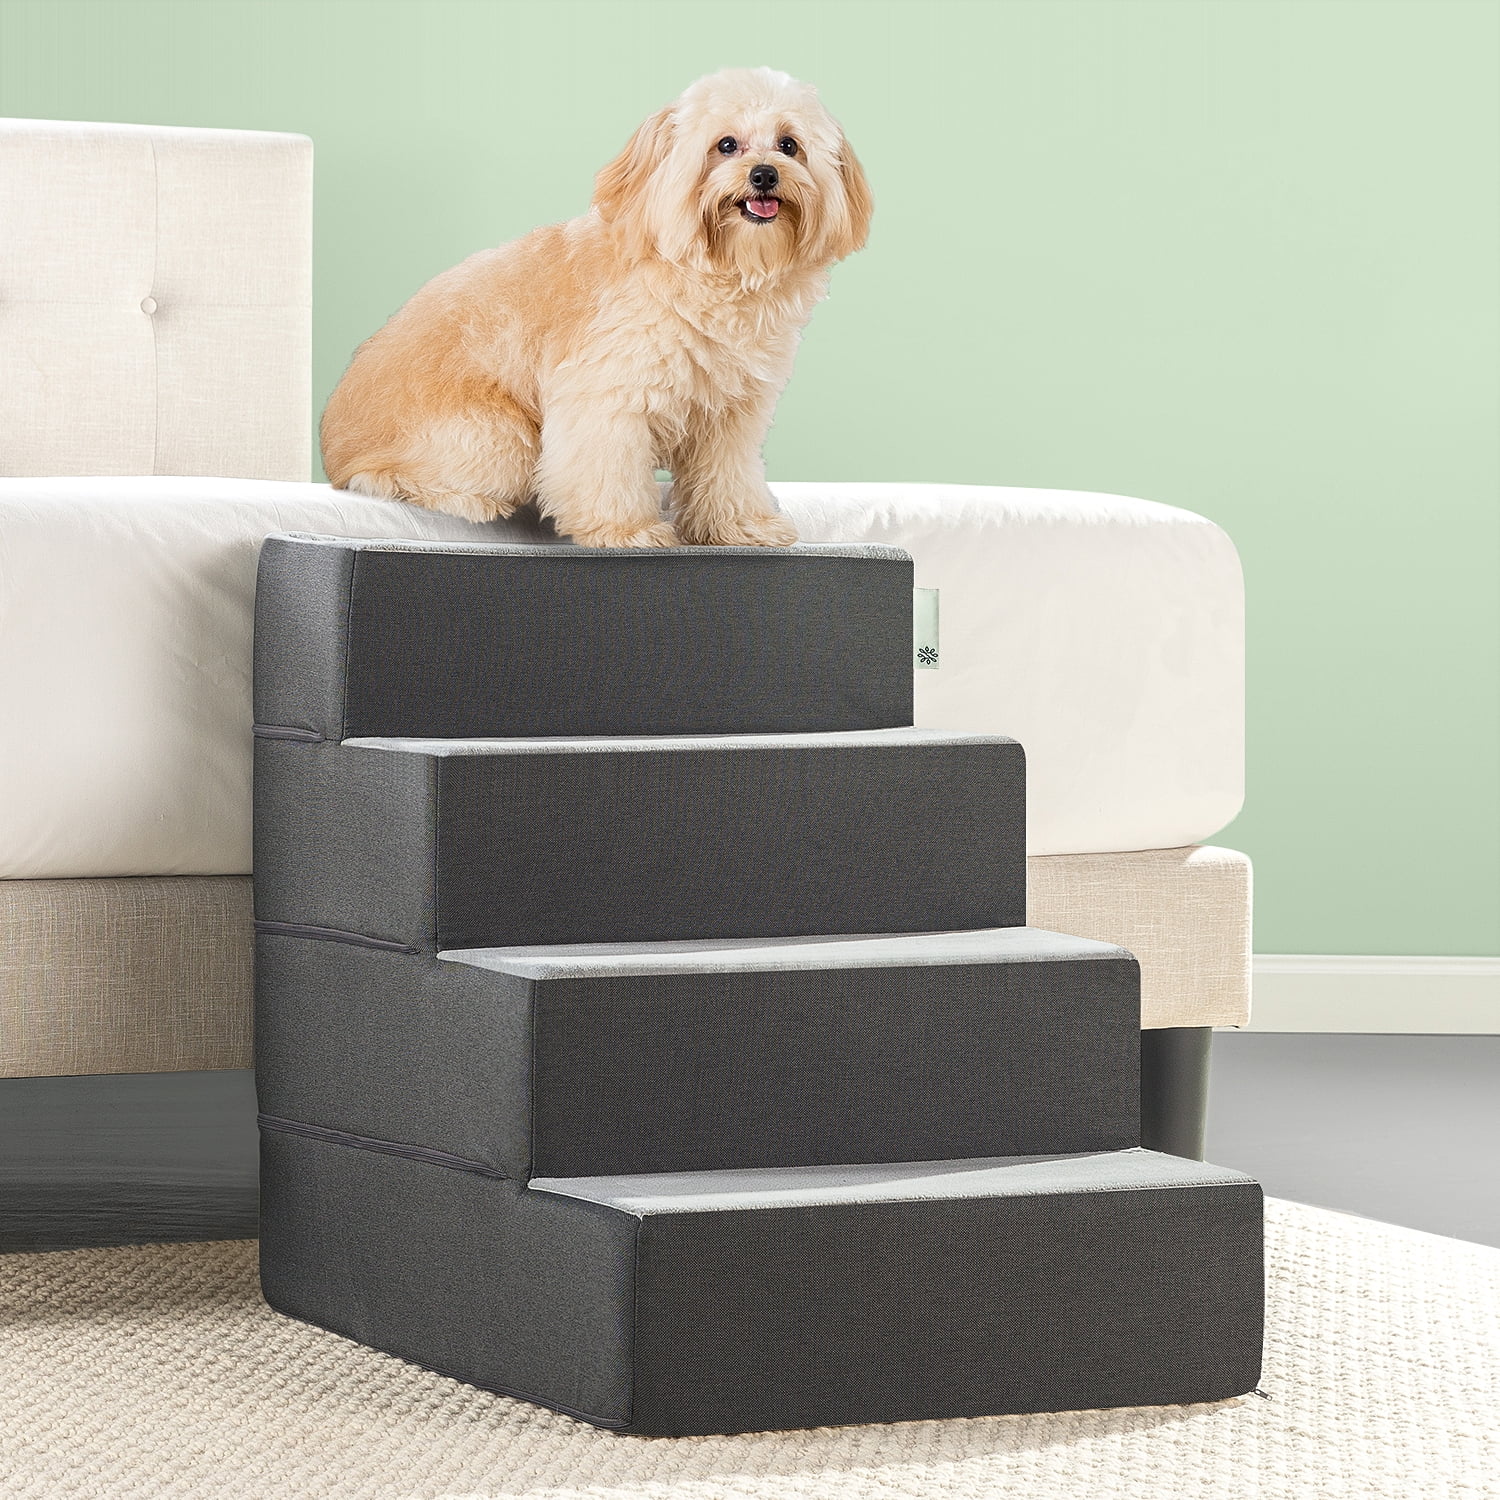 stairs for puppies